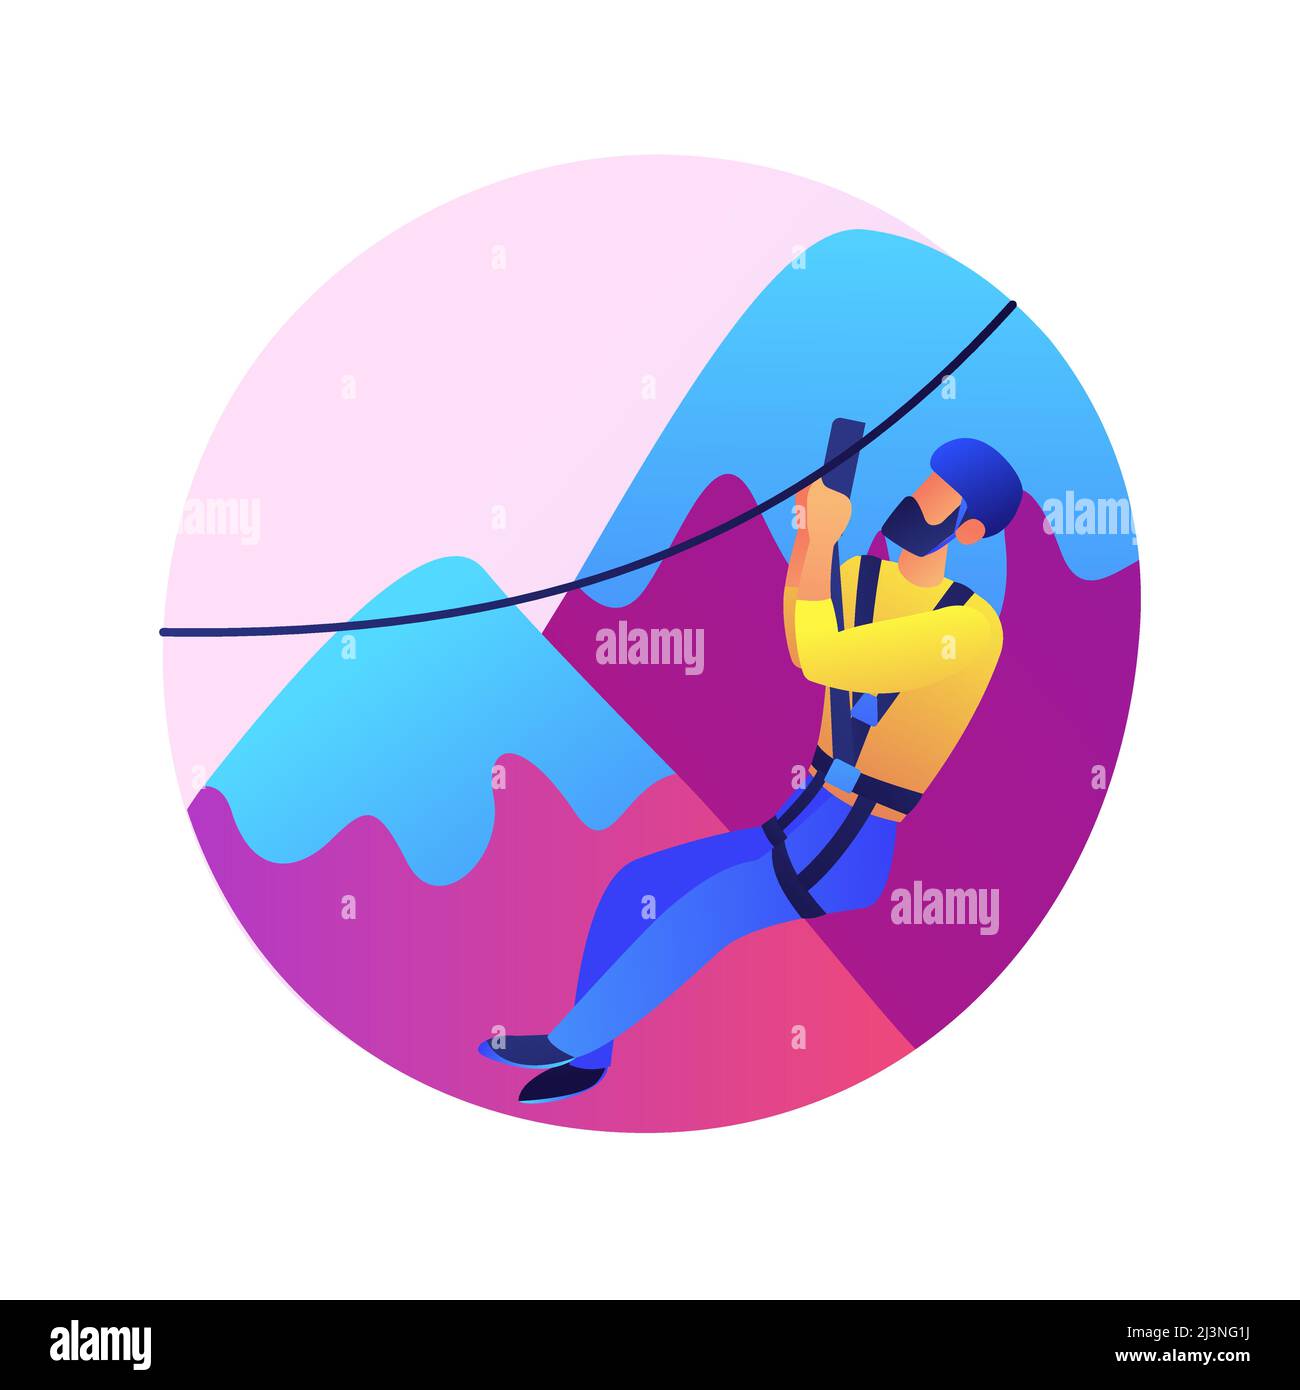 Extreme tourism abstract concept vector illustration. Extreme sports, shock tourism, adrenalin event, dangerous place, ski and snowboard, thrill-seeke Stock Vector